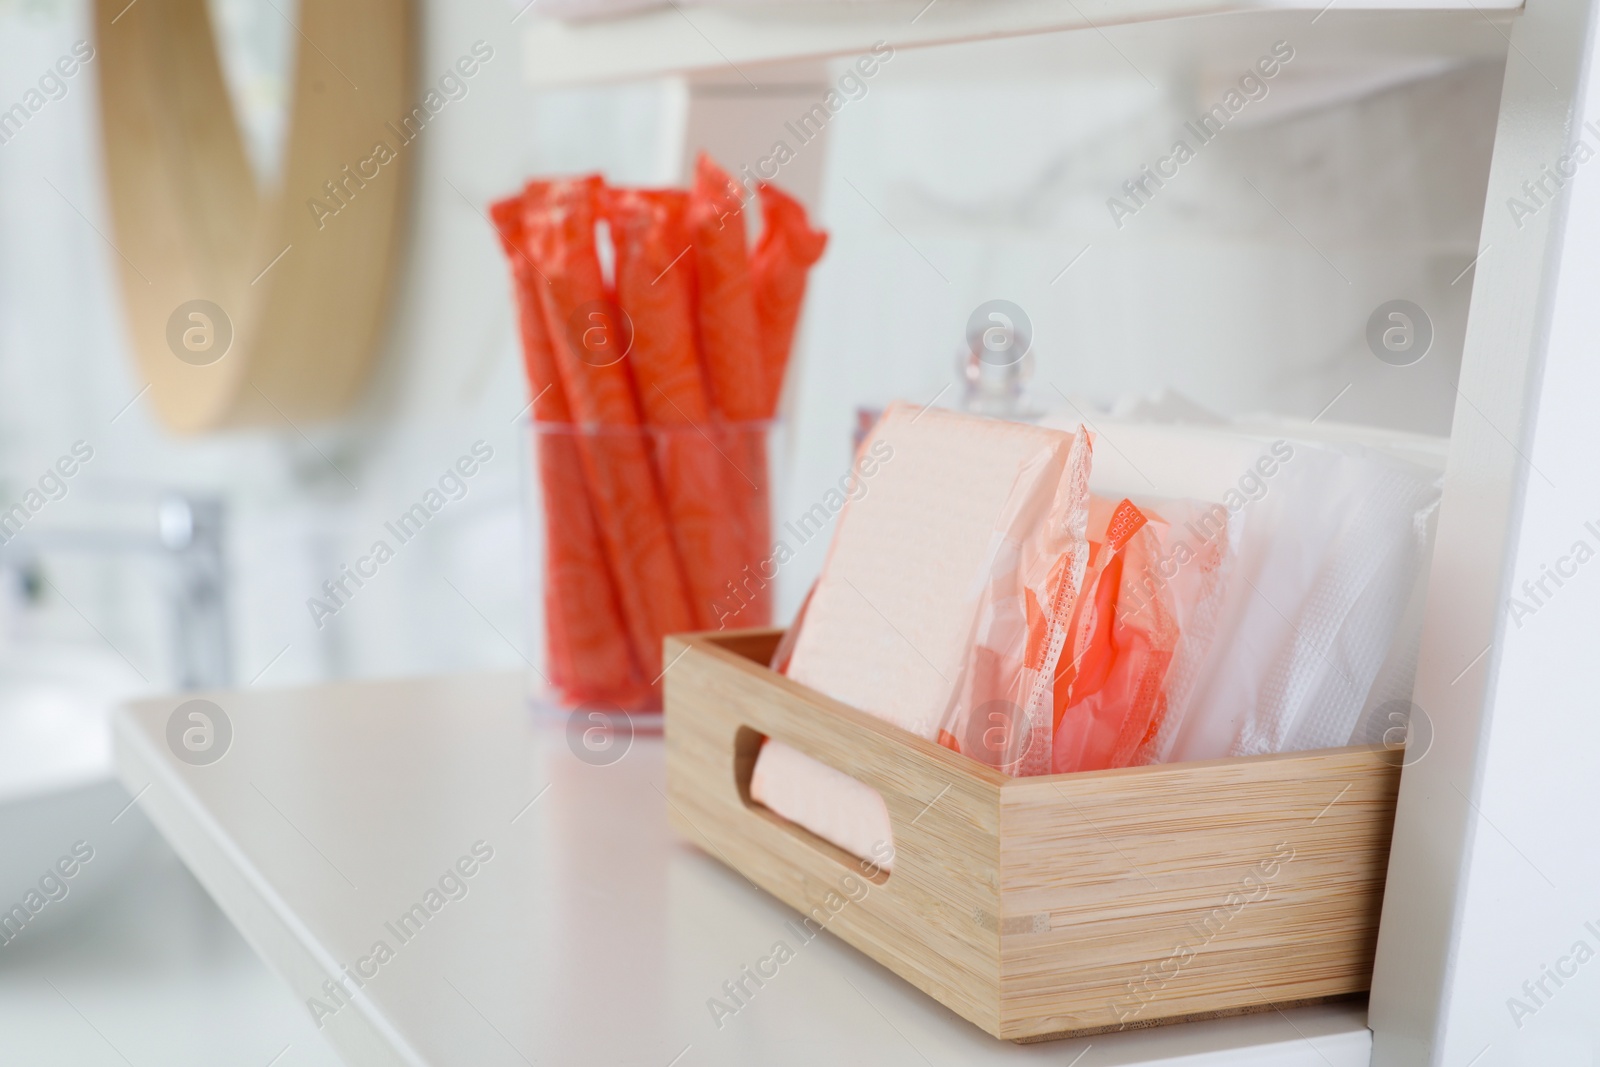 Photo of Organizer with tampons and menstrual pads on shelving unit in bathroom. Feminine hygiene products